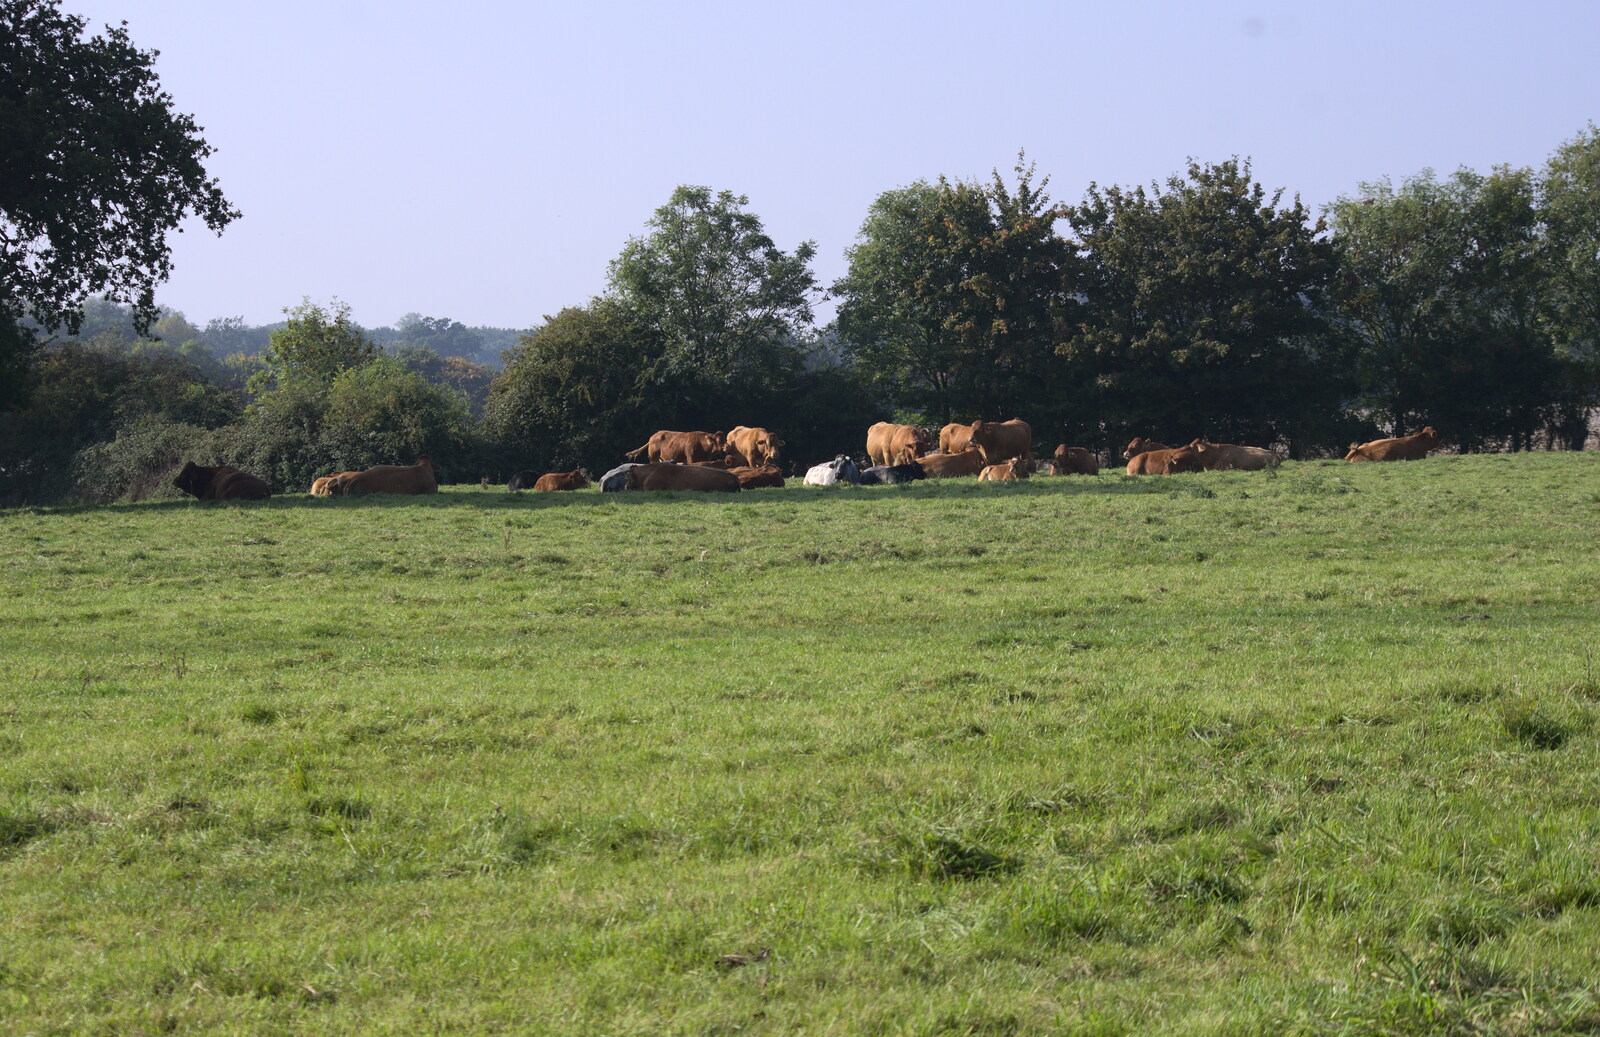 The cows have a lie down from The Mushrooms of Thornham Estate, Thornham, Suffolk - 4th October 2015